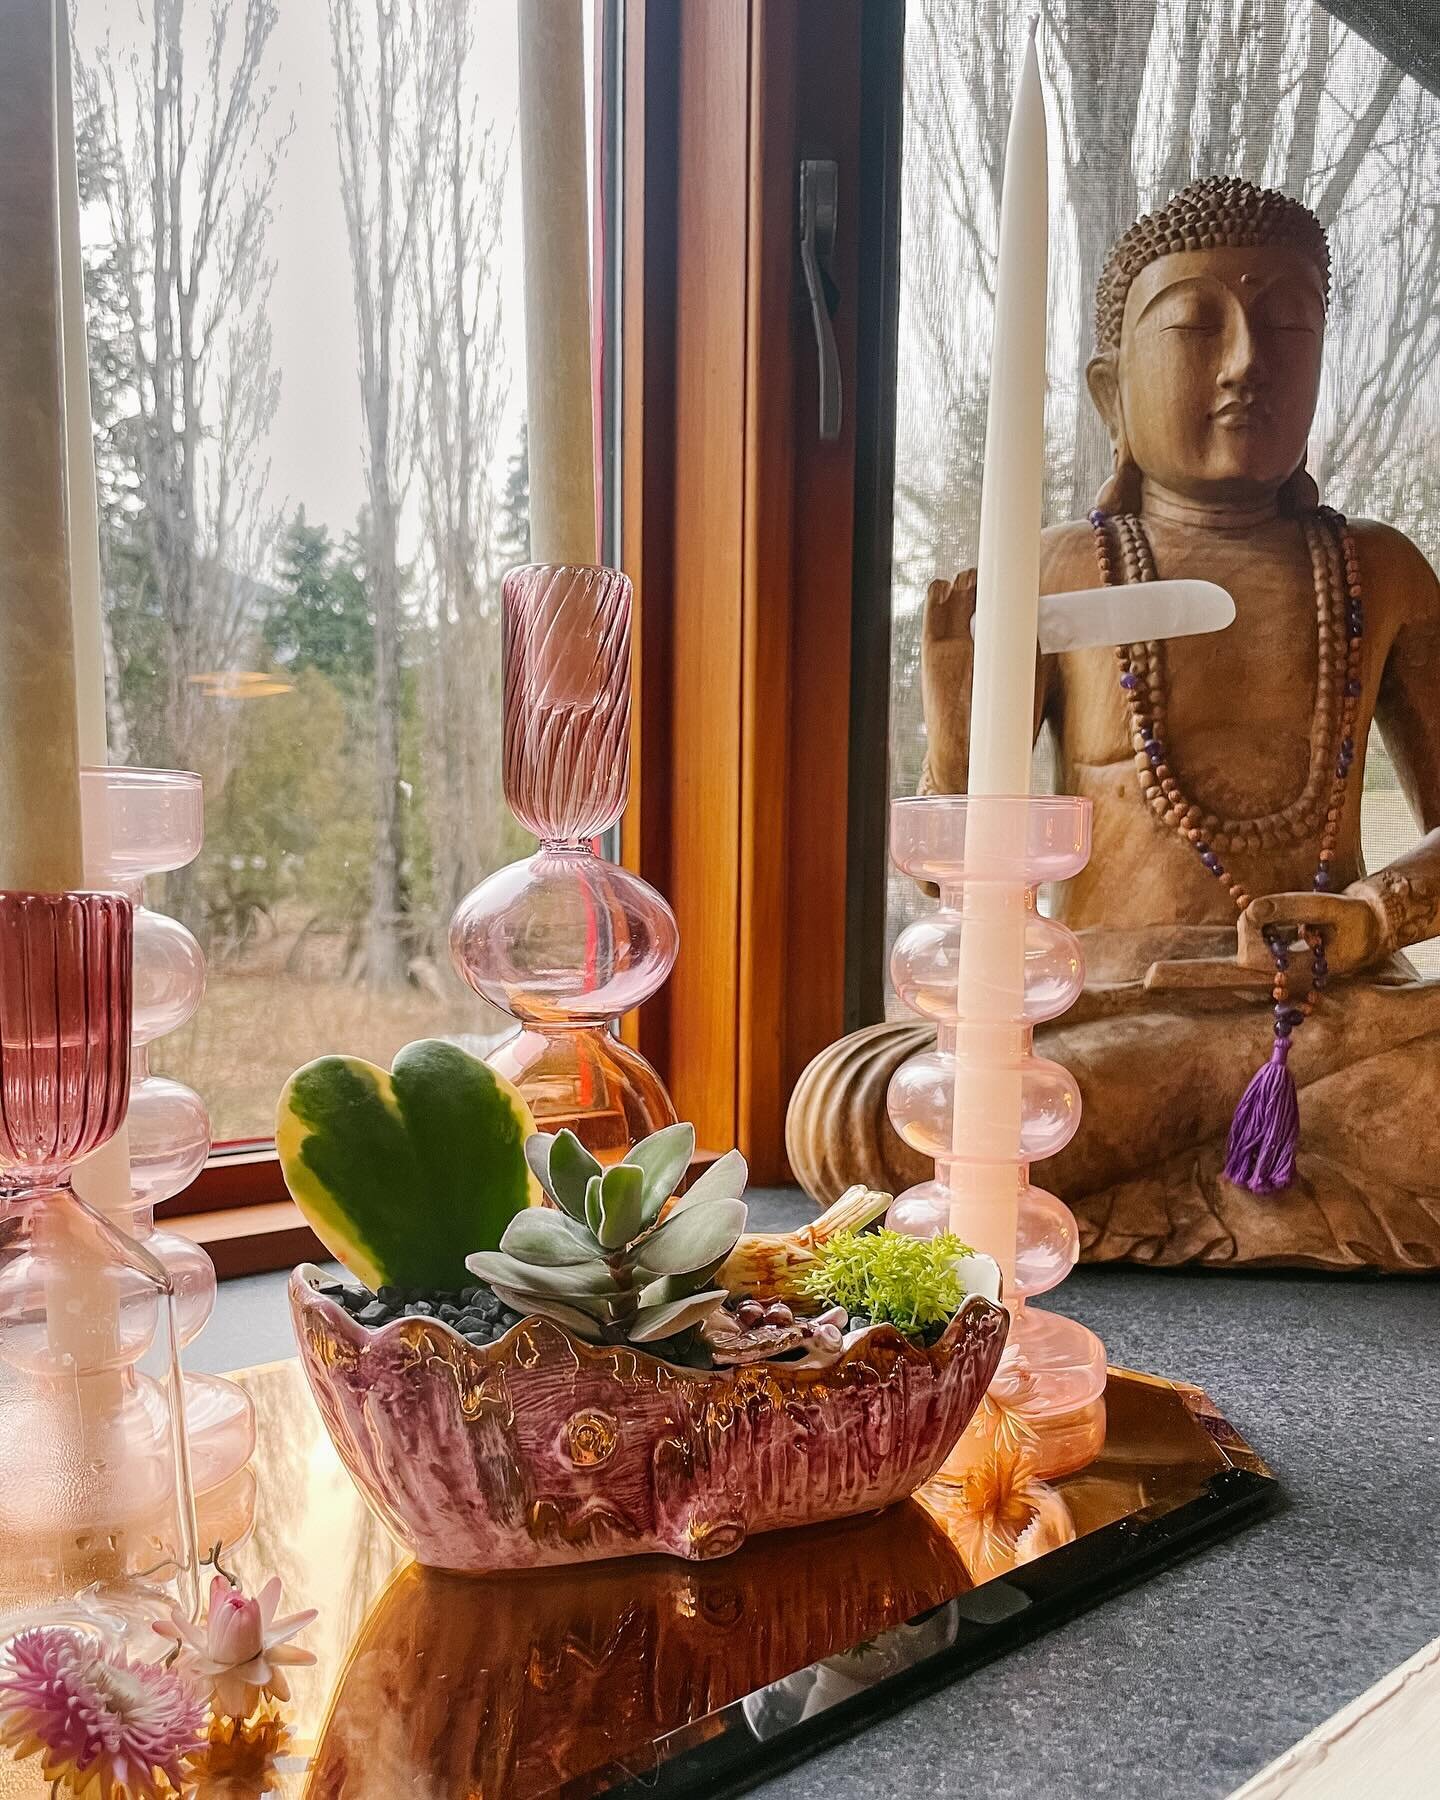 Spring has sprung and it&rsquo;s not just about dusting off the cobwebs&mdash;it&rsquo;s about letting in that fresh, new energy! 
🌸✨ Give your windows a little love with a good clean to sparkle up your view and your vibes. 
Because in the world of 